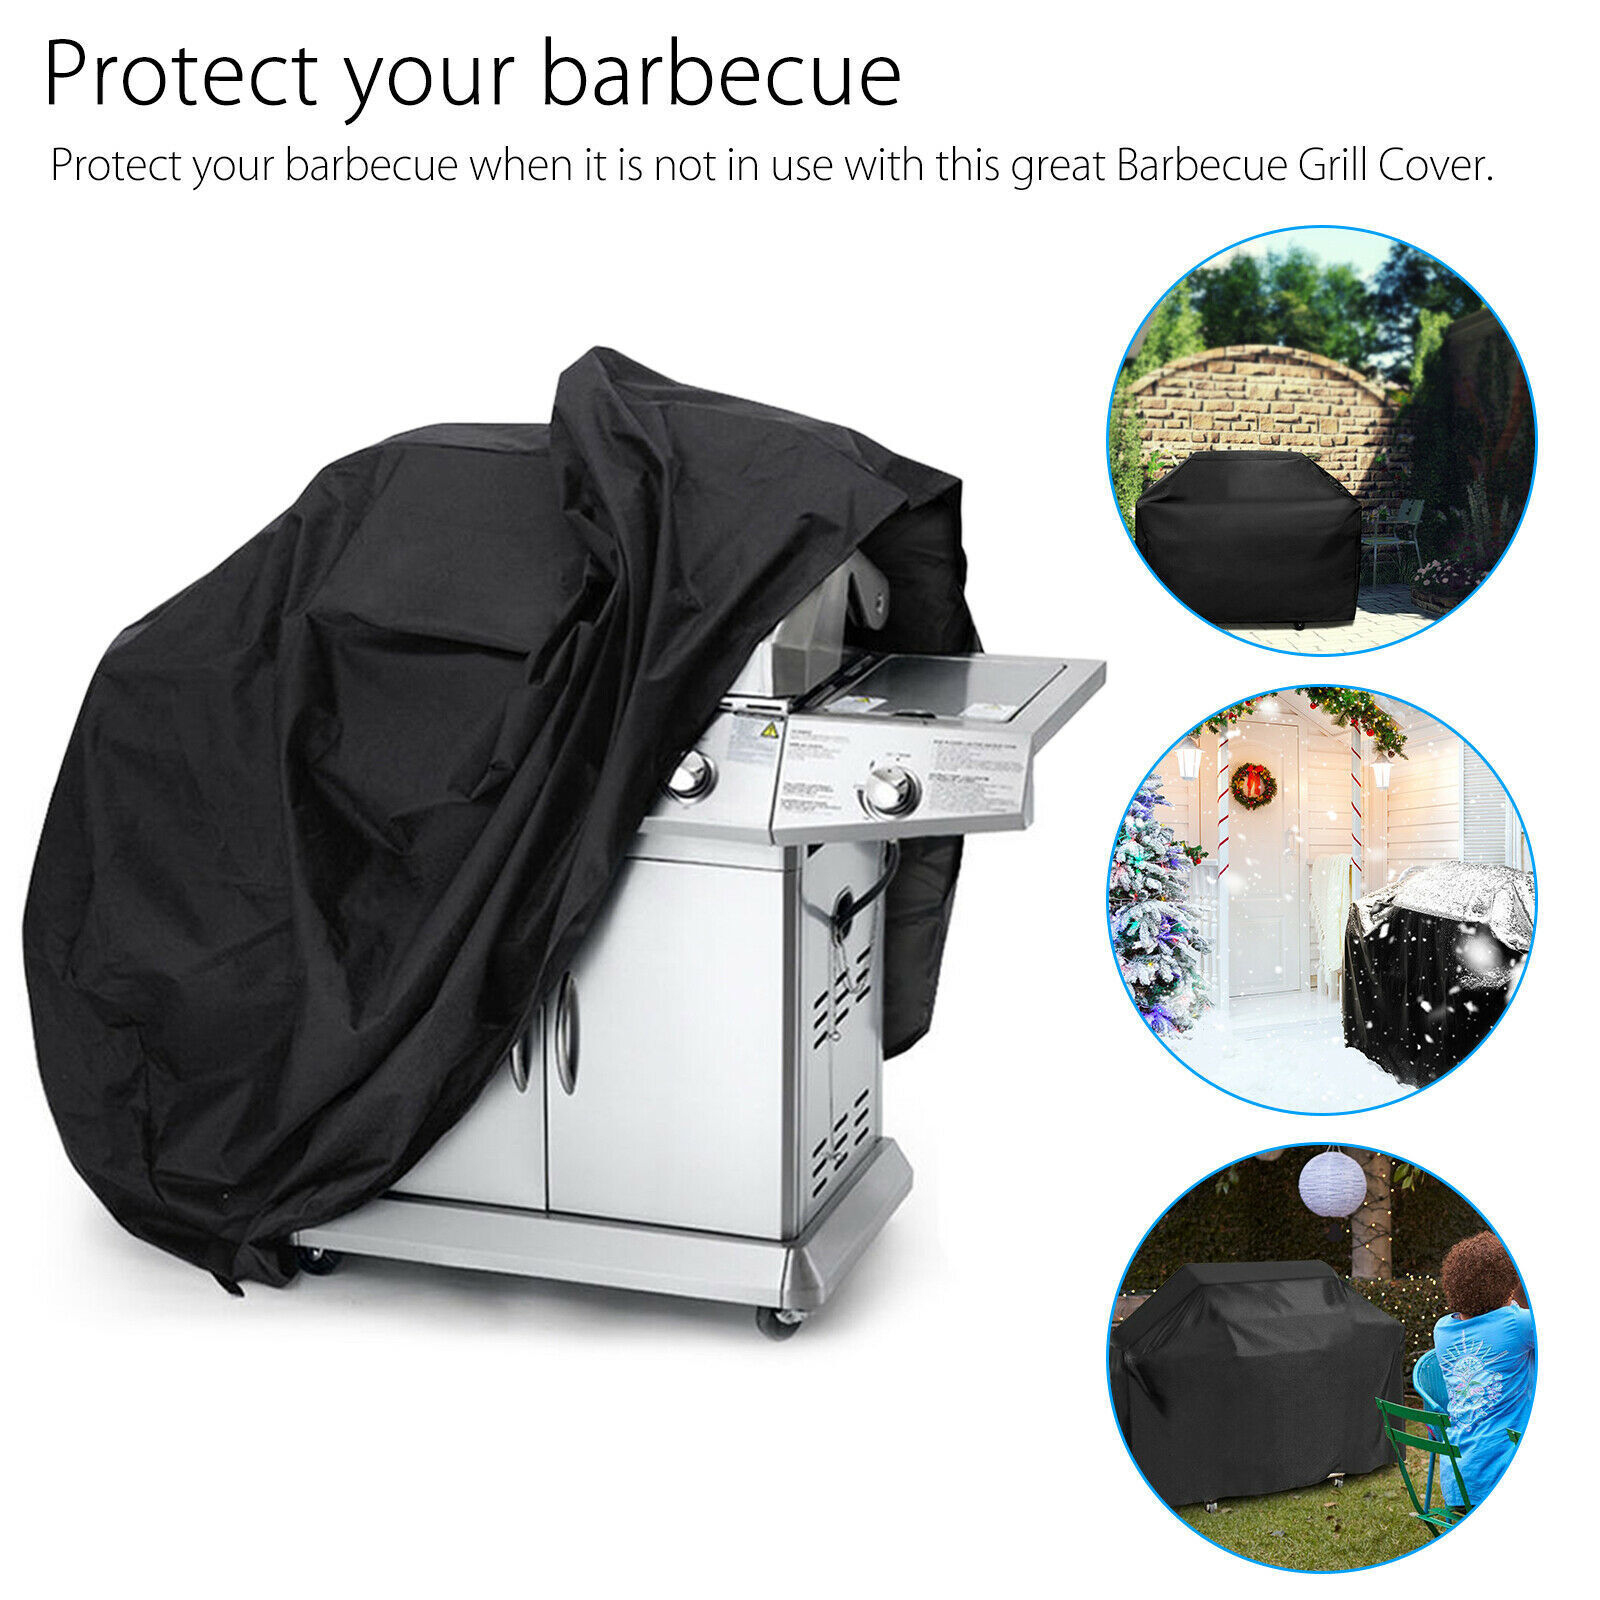 NSI Toys 57 Inch Bbq Gas Grill Cover Barbecue Waterproof Outdoor Heavy Duty Uv Protection